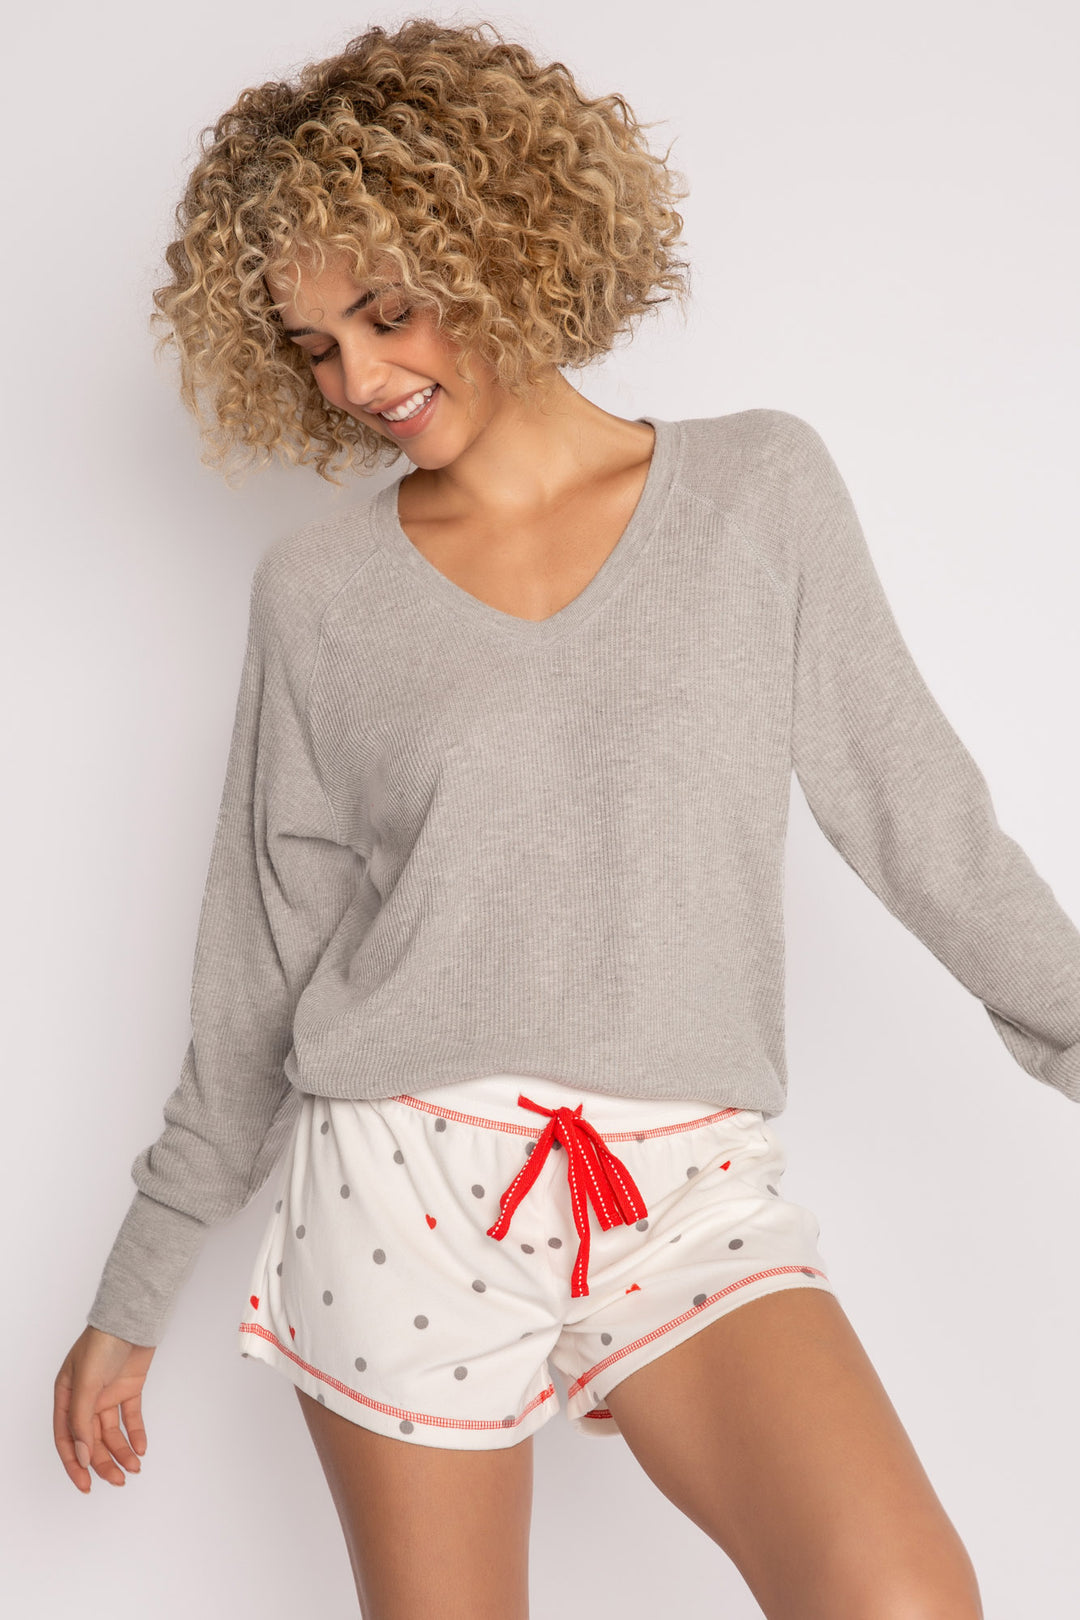 Silky velour knit pajama short in ivory-grey-red dot pattern. Contrast red stitching & red tie-waist (7257678315620)